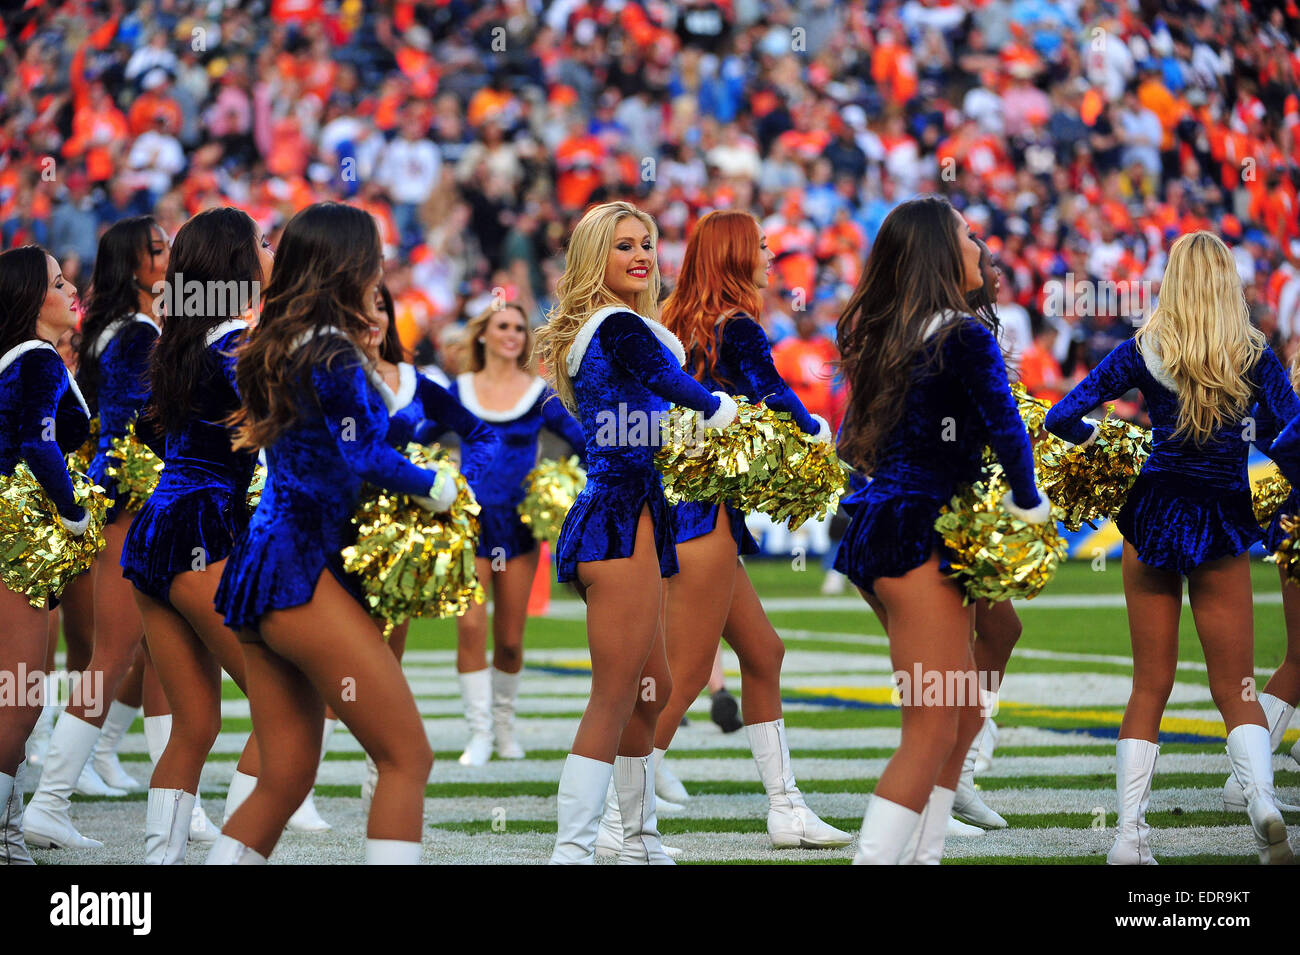 December 14, 2014 San Diego Chargers cheerleaders during the NFL Football game between the Denver Broncos and the San Diego Chargers at the Qualcomm Stadium in San Diego, California.Charles Baus/CSM Stock Photo